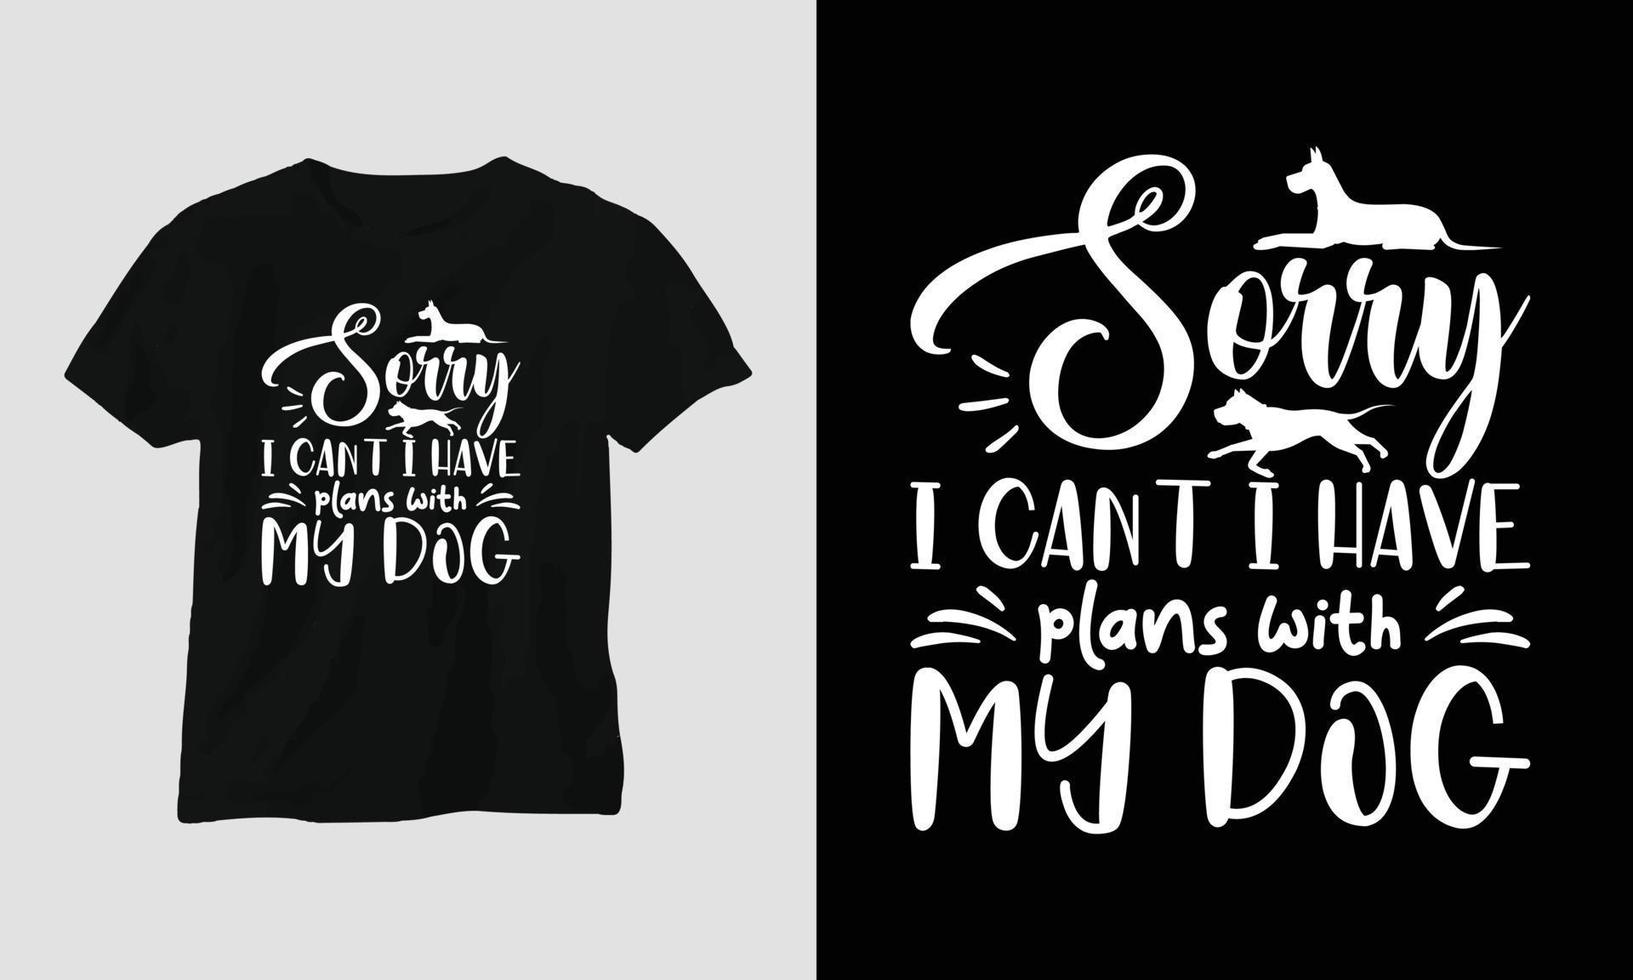 Sorry i can not i have plans with my dog - Dog quotes T-shirt and apparel design vector